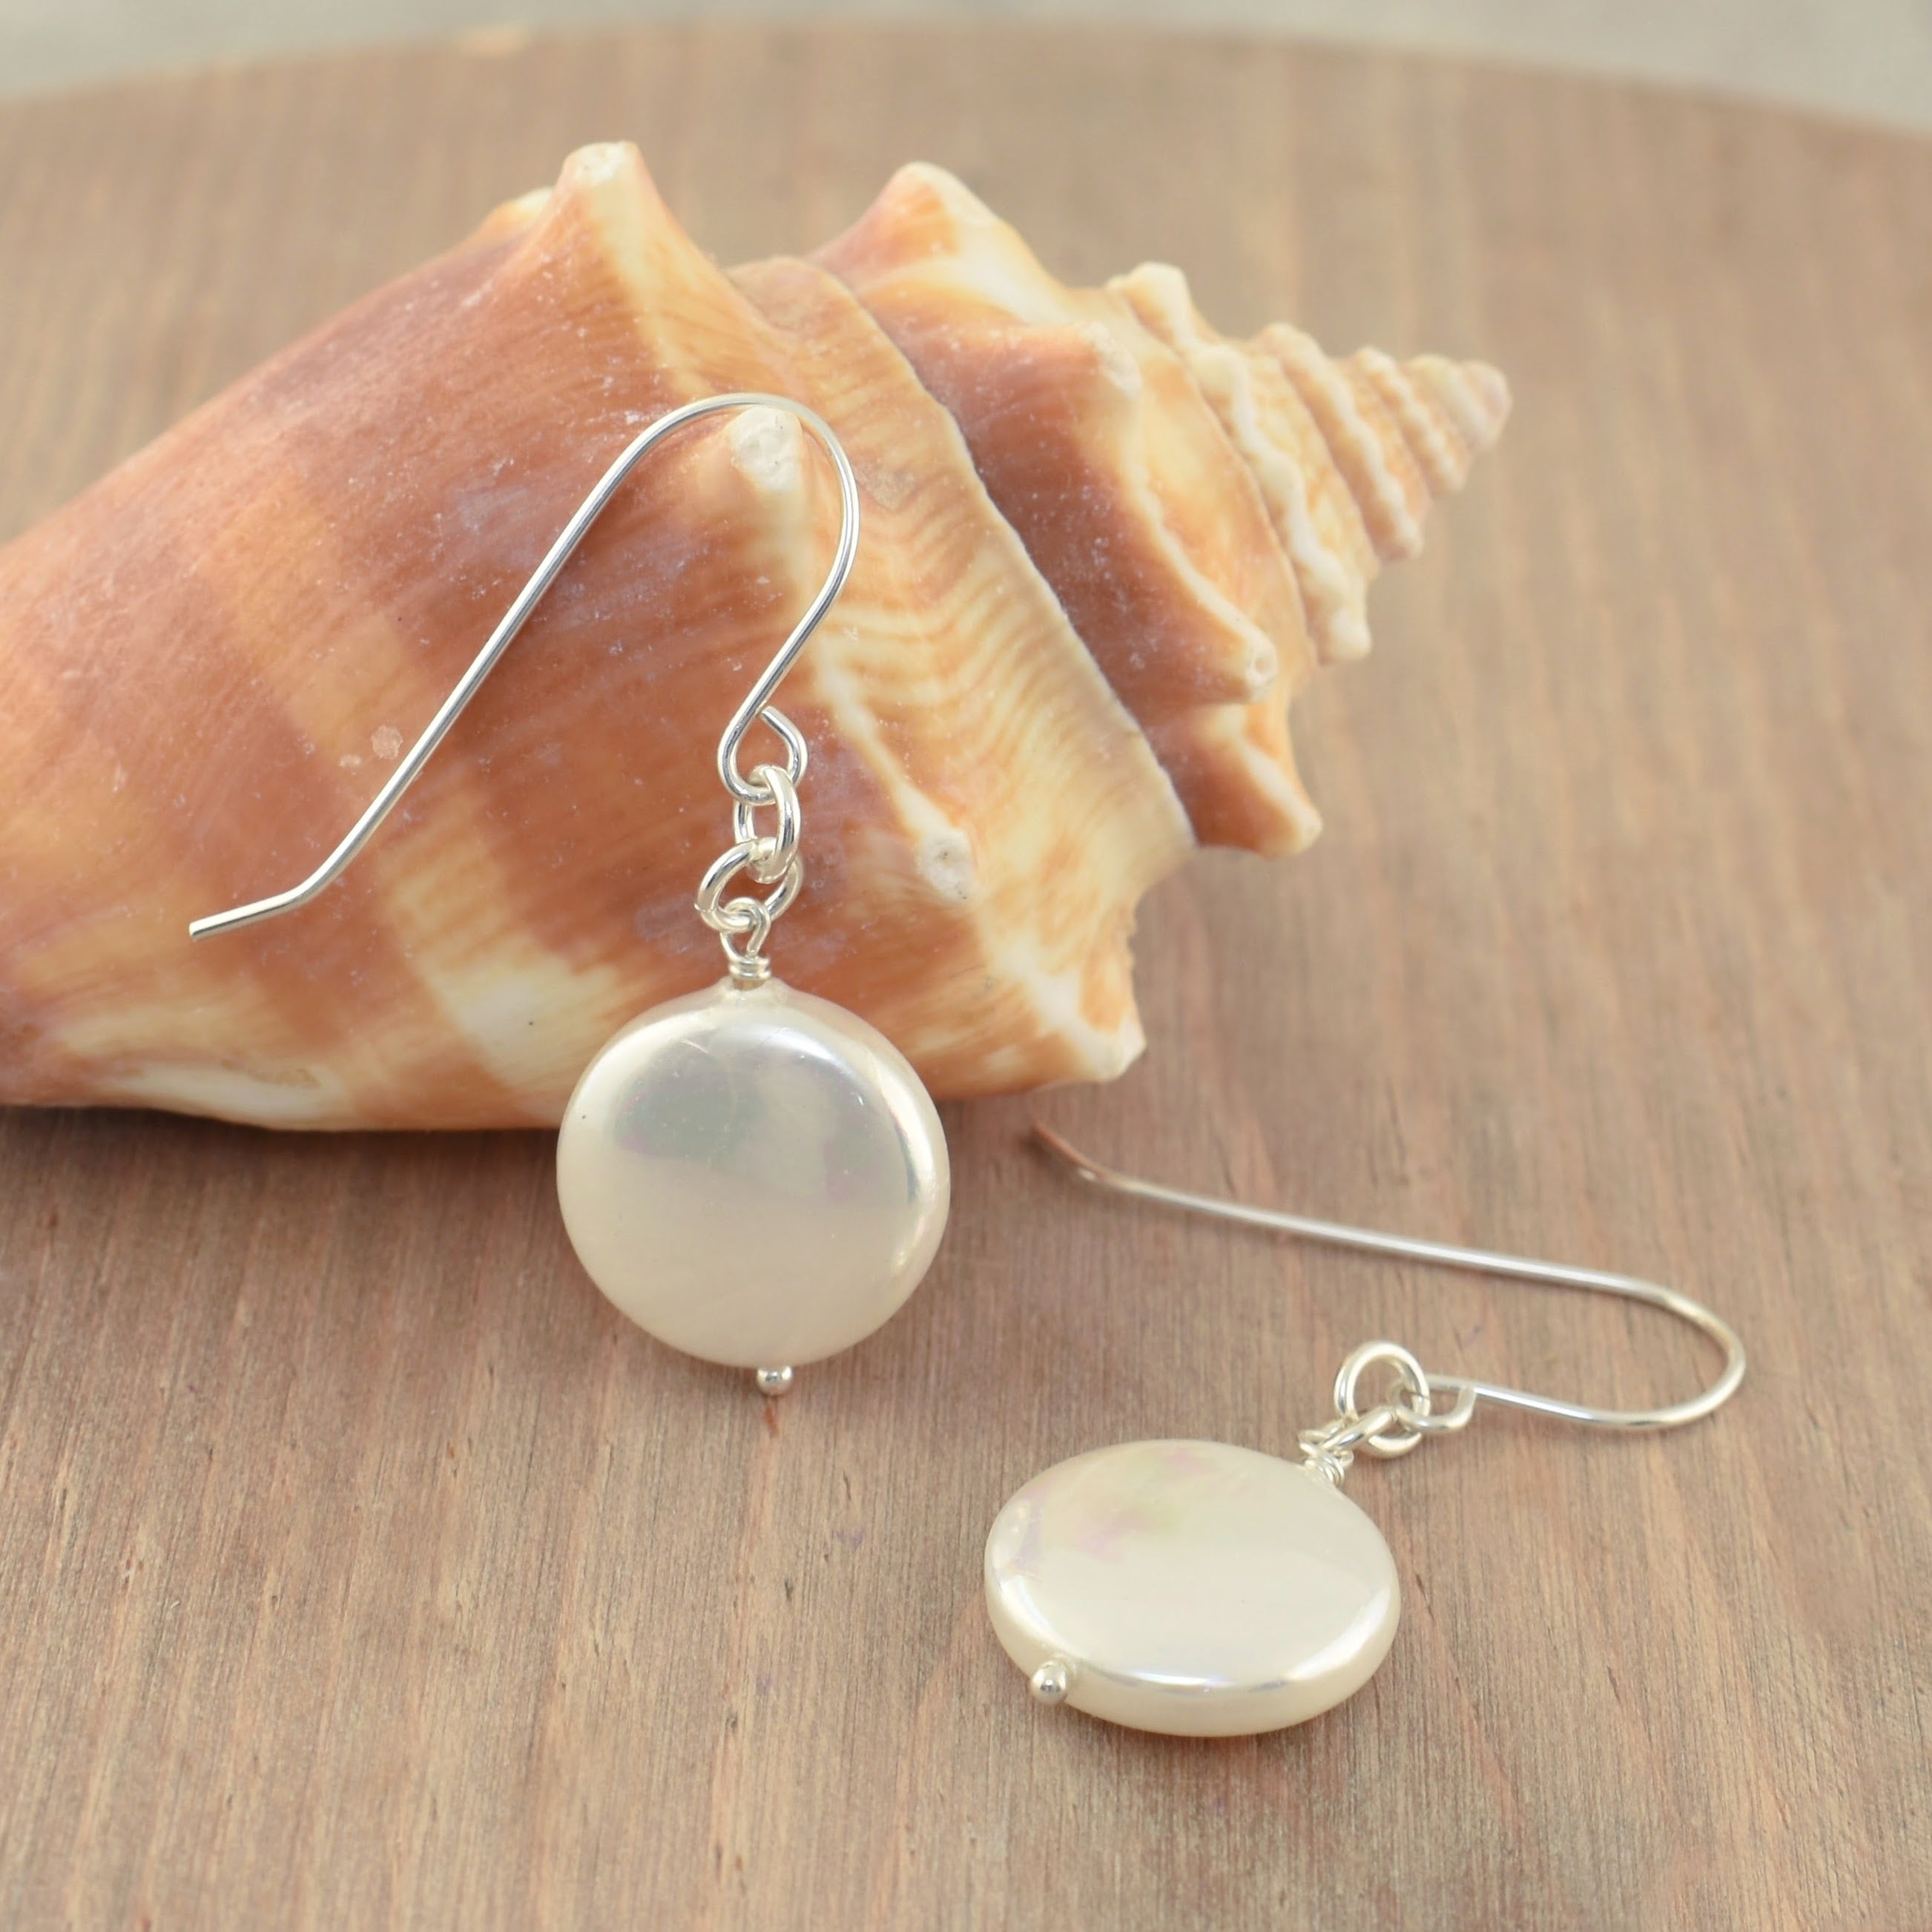 .925 sterling silver and faux coin pearl earrings on French wires